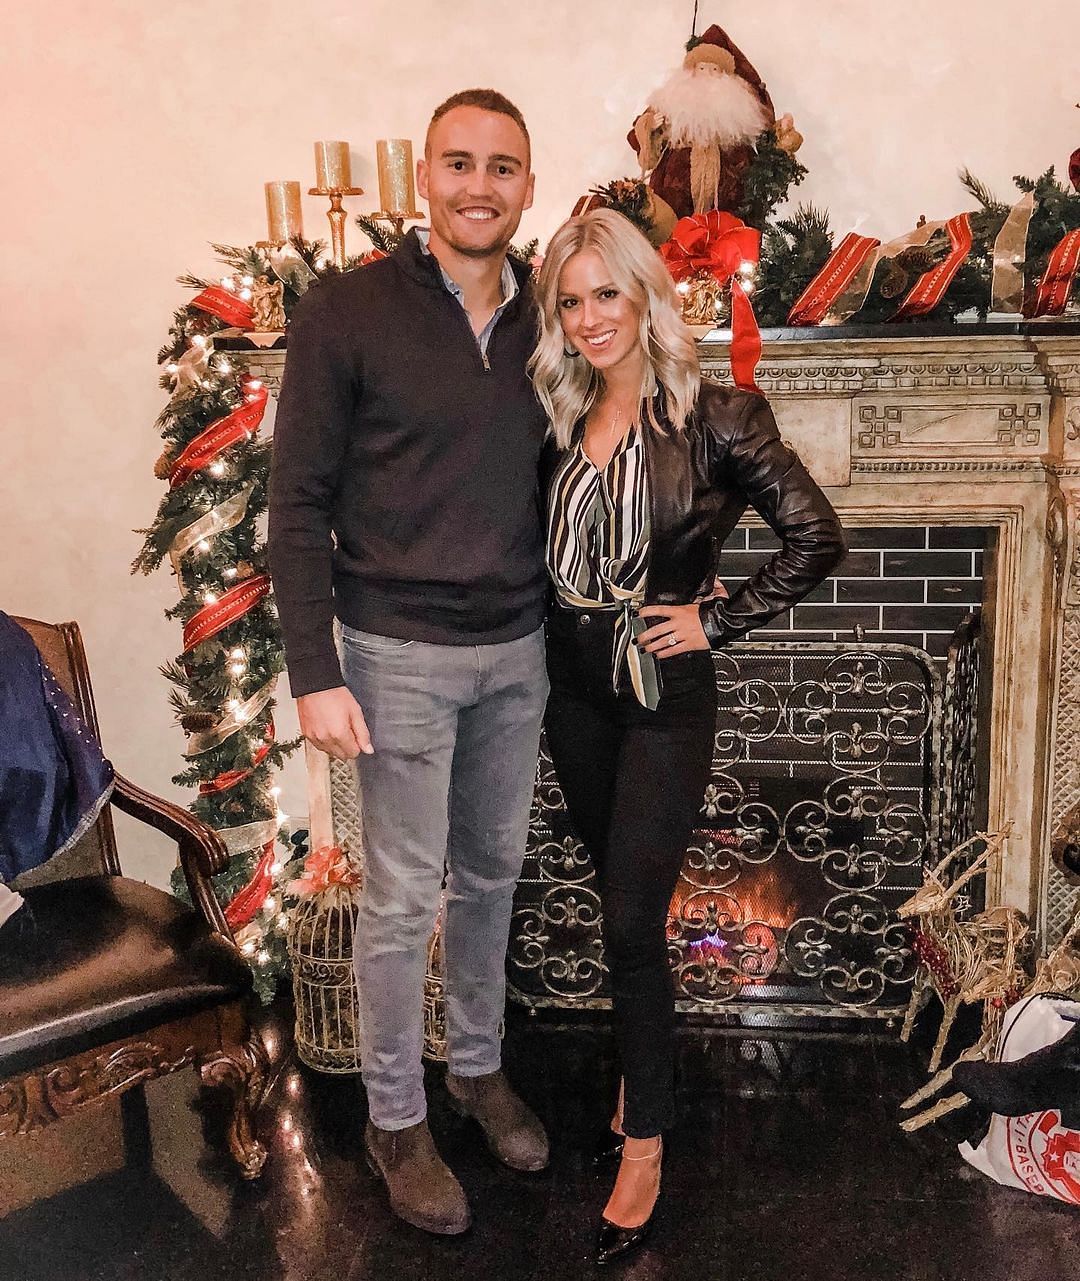 Brandon Nimmo and his wife. Brandon Nimmo&rsquo;s official Instagram account - @bnimmo24